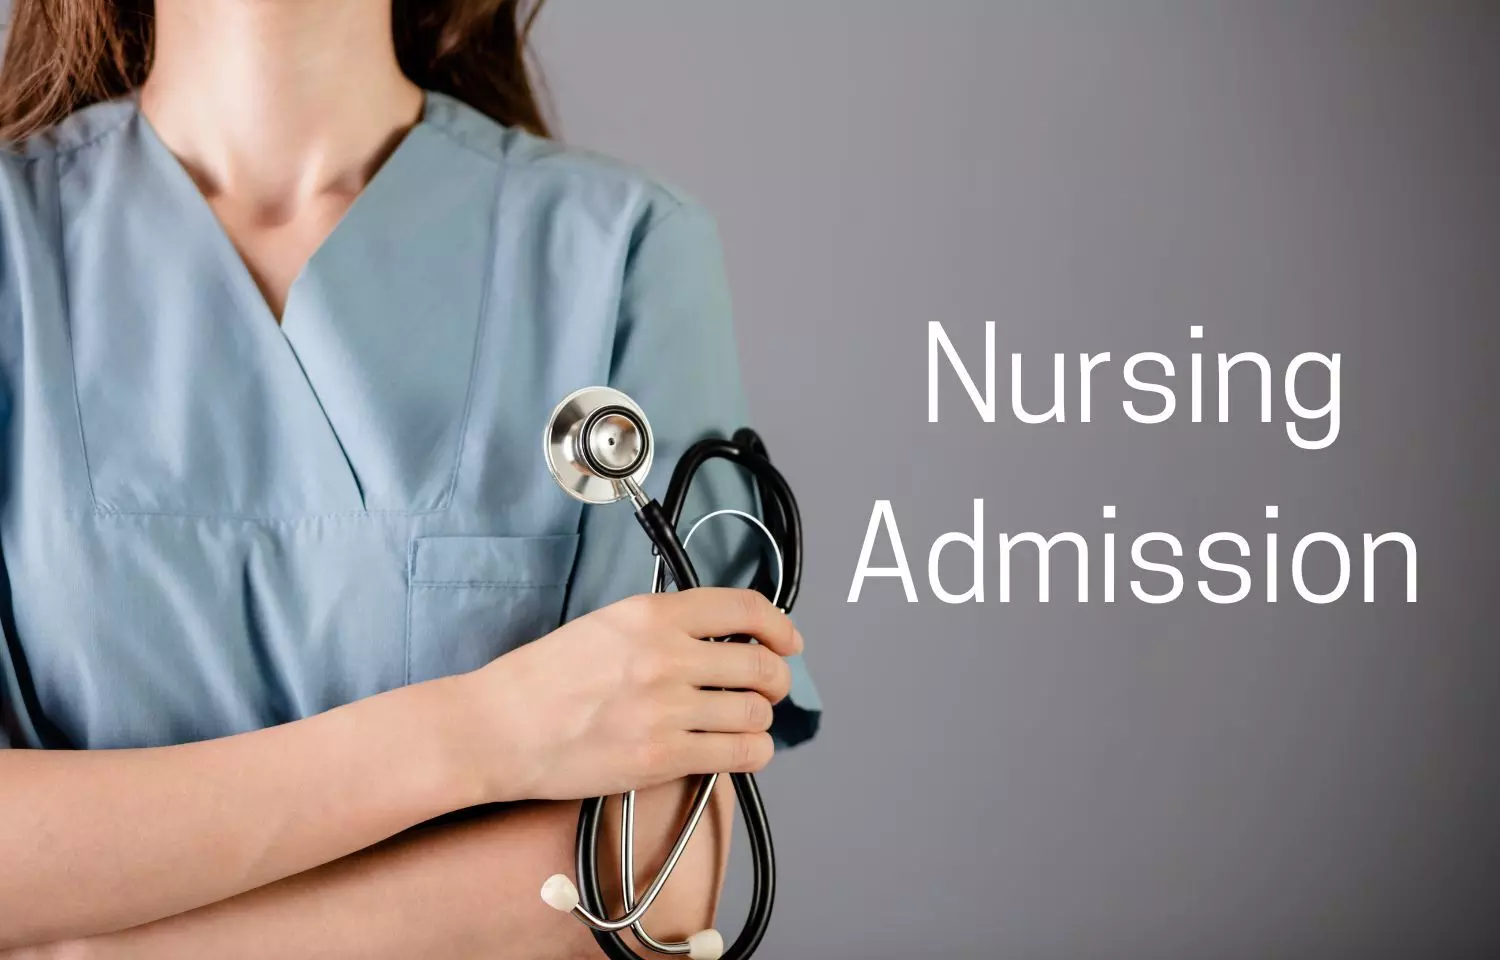 BSc Nursing Admissions 2022: DHS Invites Online Application For Academic Session 2022-23, Check out Details